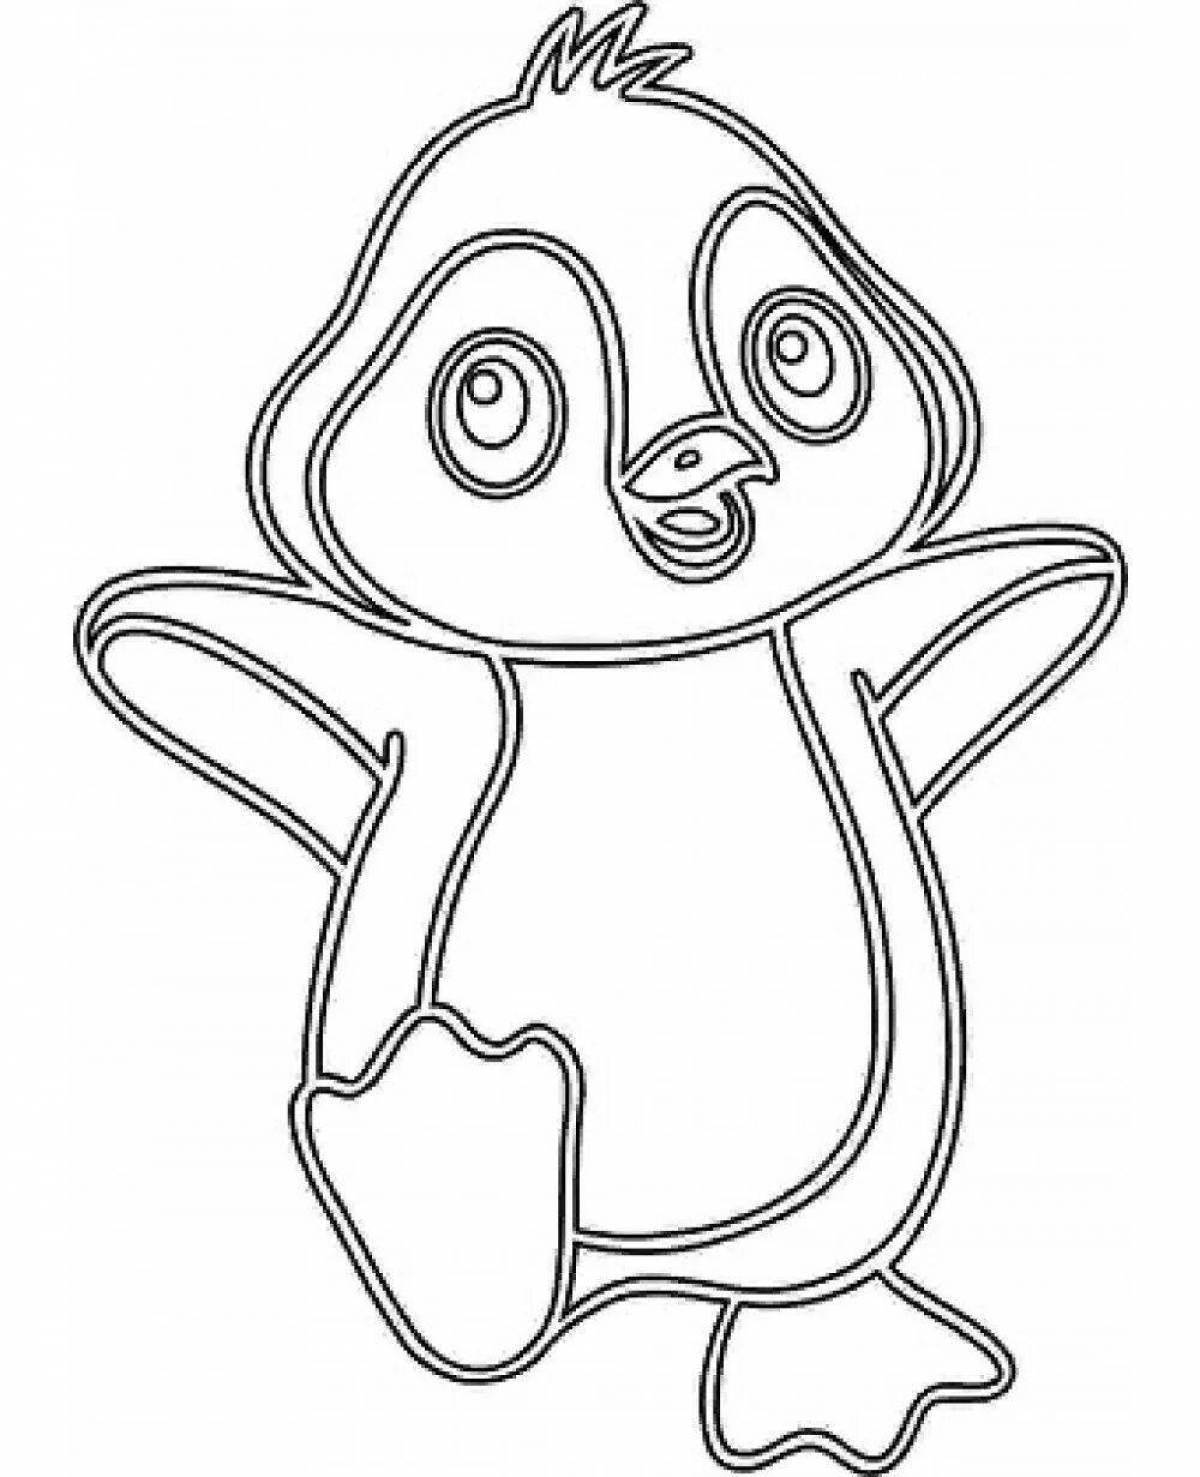 Outstanding three handle coloring page d